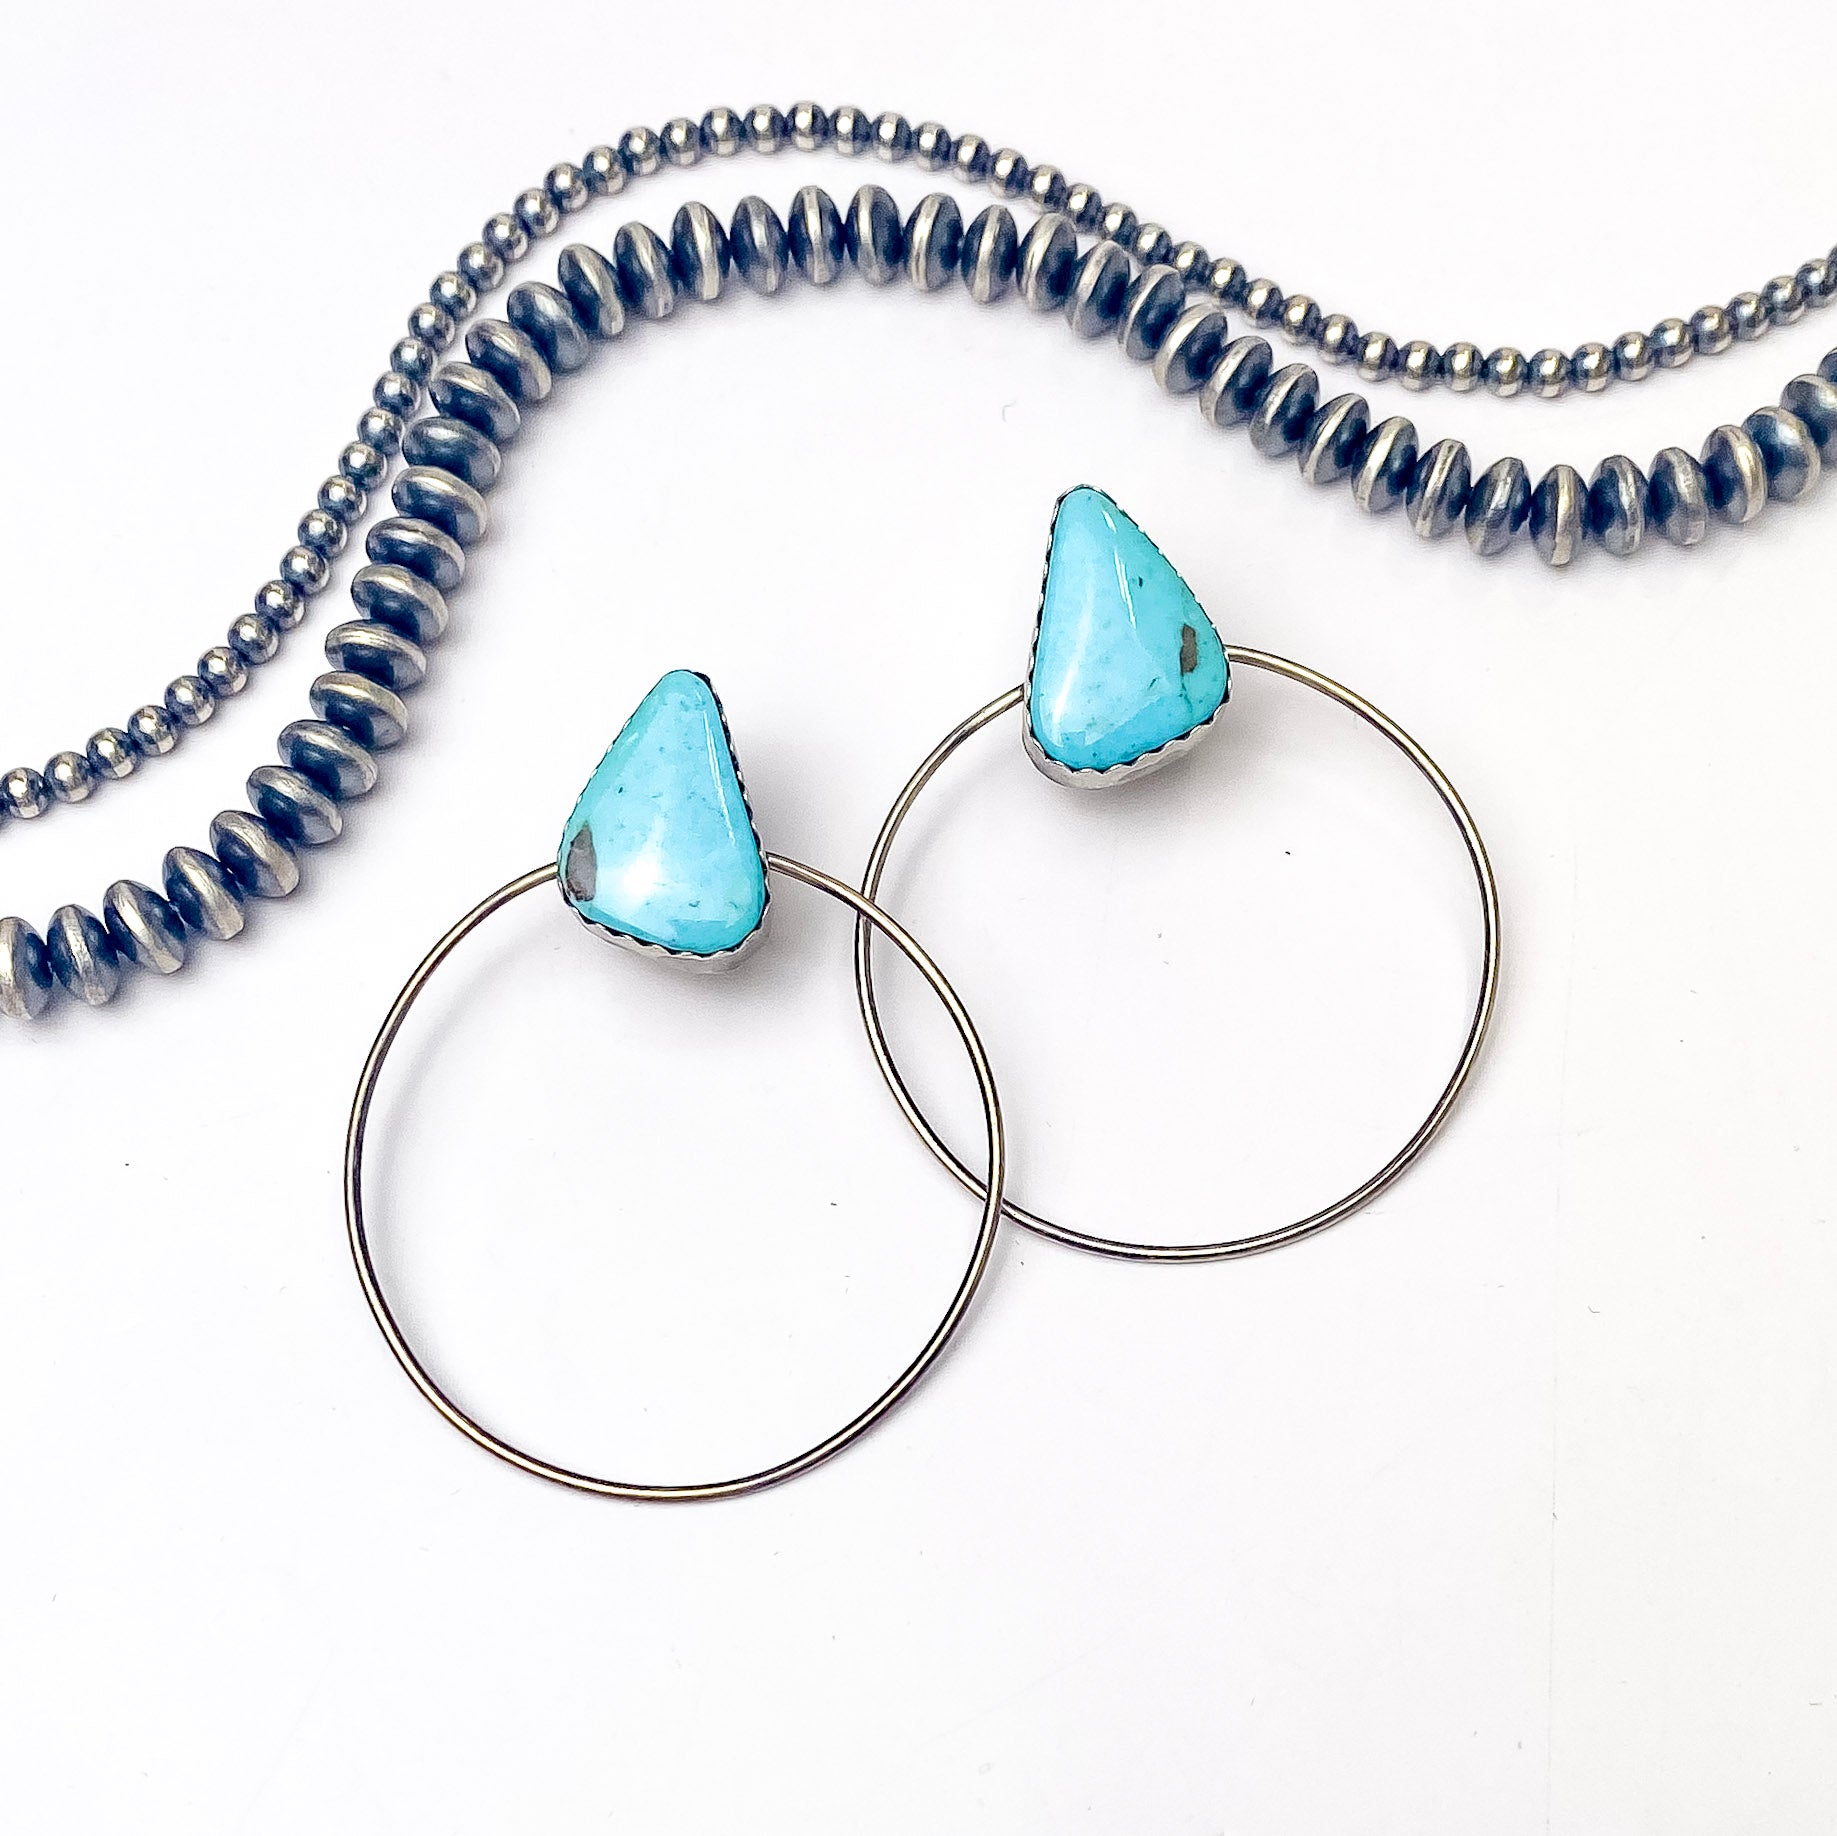 In the picture are handmade sterling silver hoops with a blue triangle stone stud on top with a white background